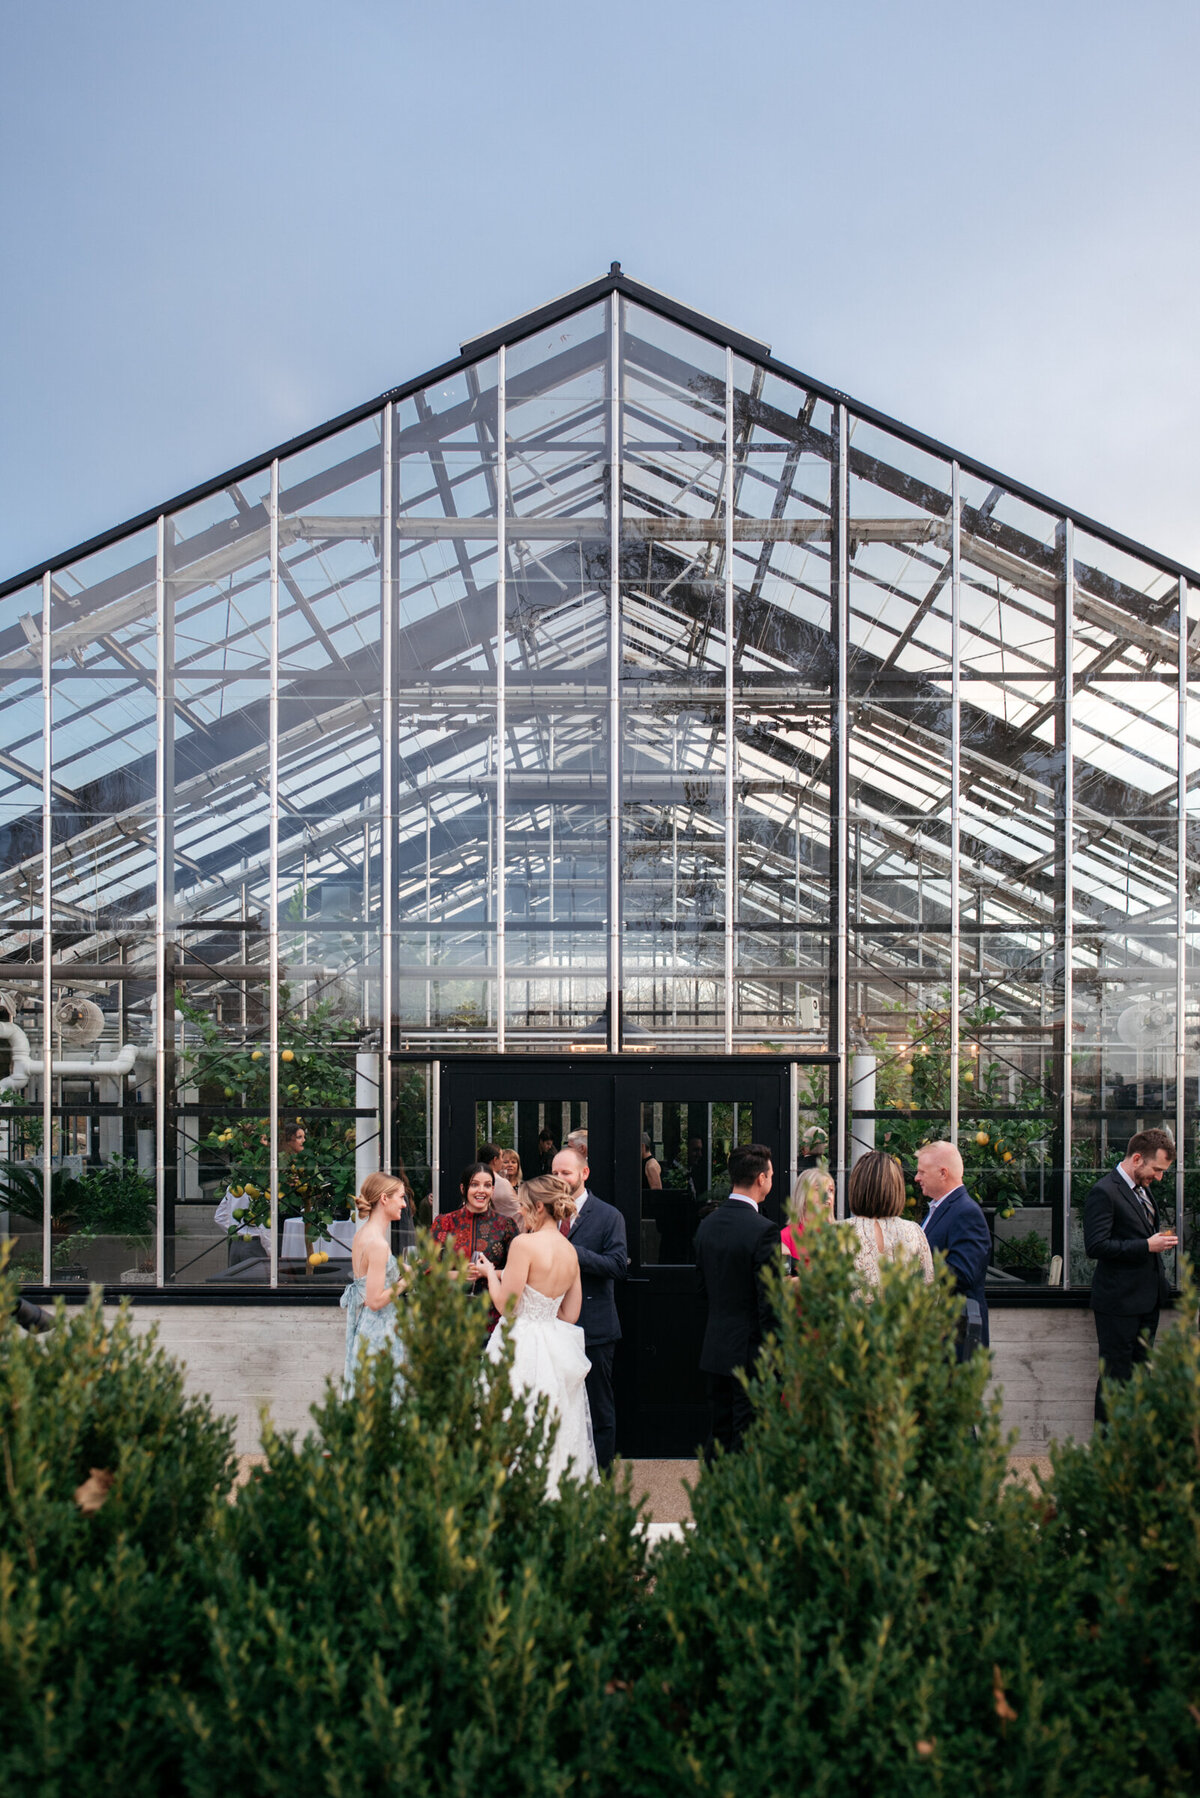 Cocktail hour for a wedding at a greenhouse